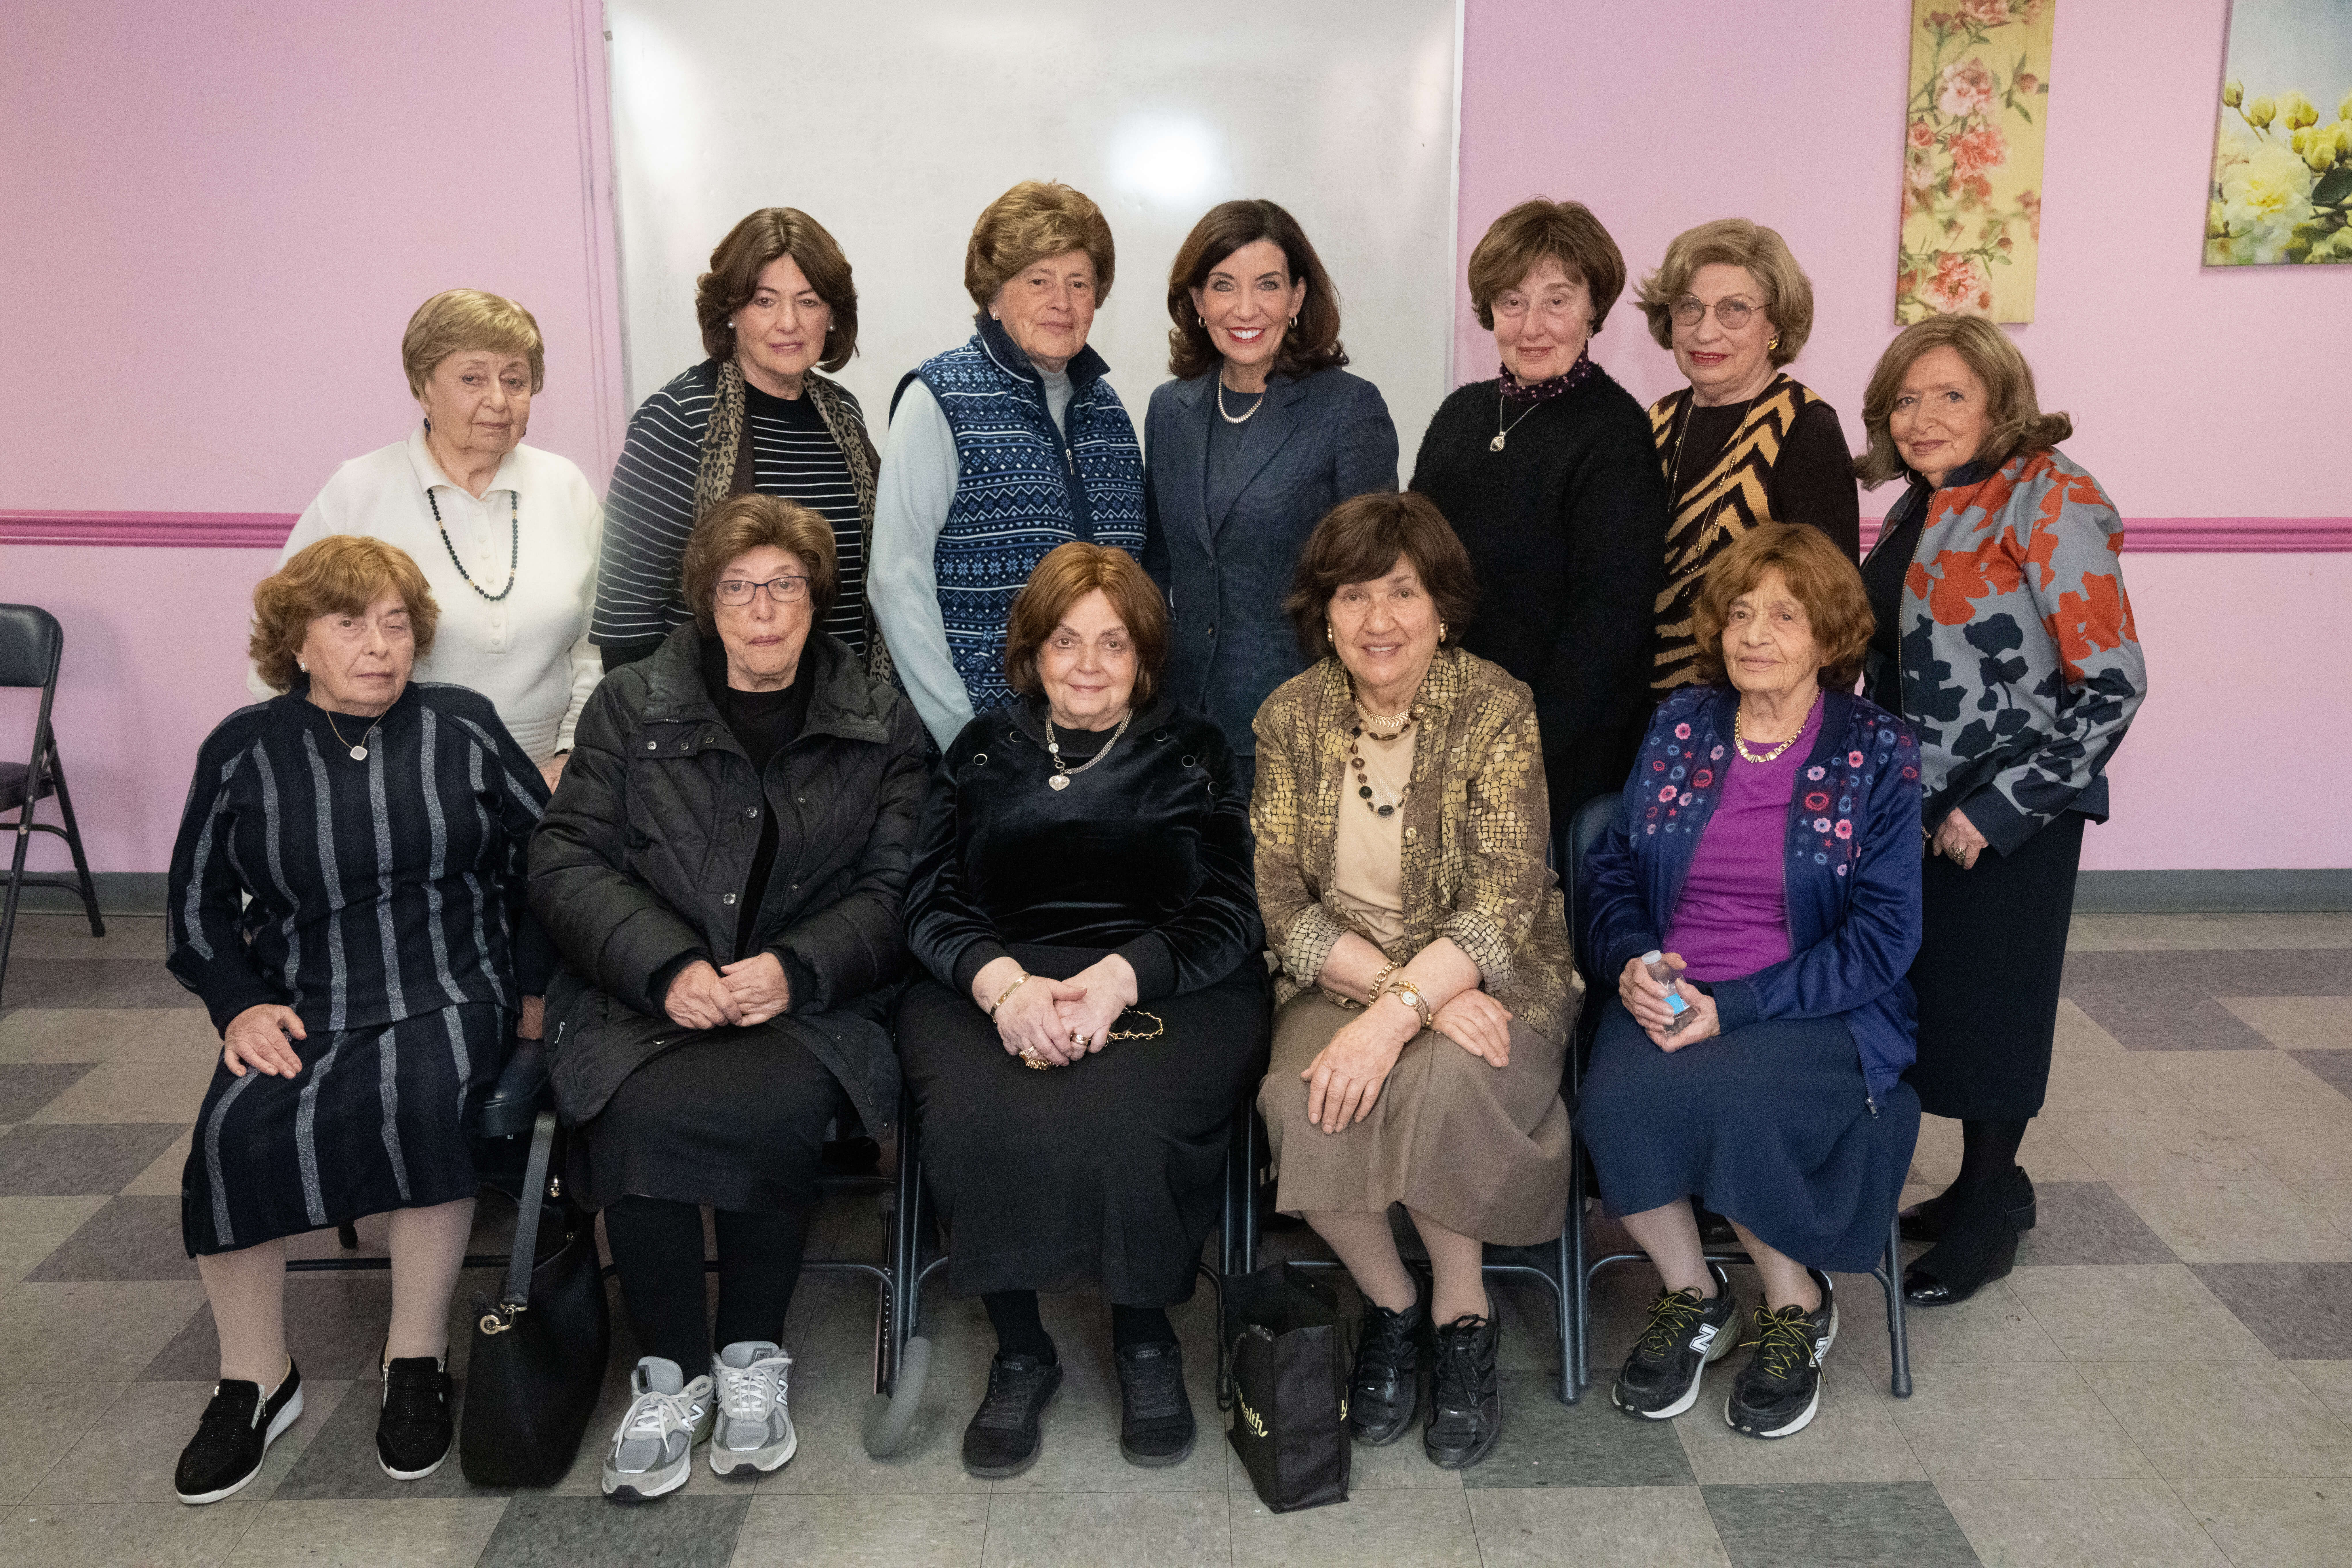 Governor Kathy Hochul meets with a number of Holocaust survivors in Brooklyn ahead of an announcement on funding to the Holocaust Survivors Initiative on April 27, 2022